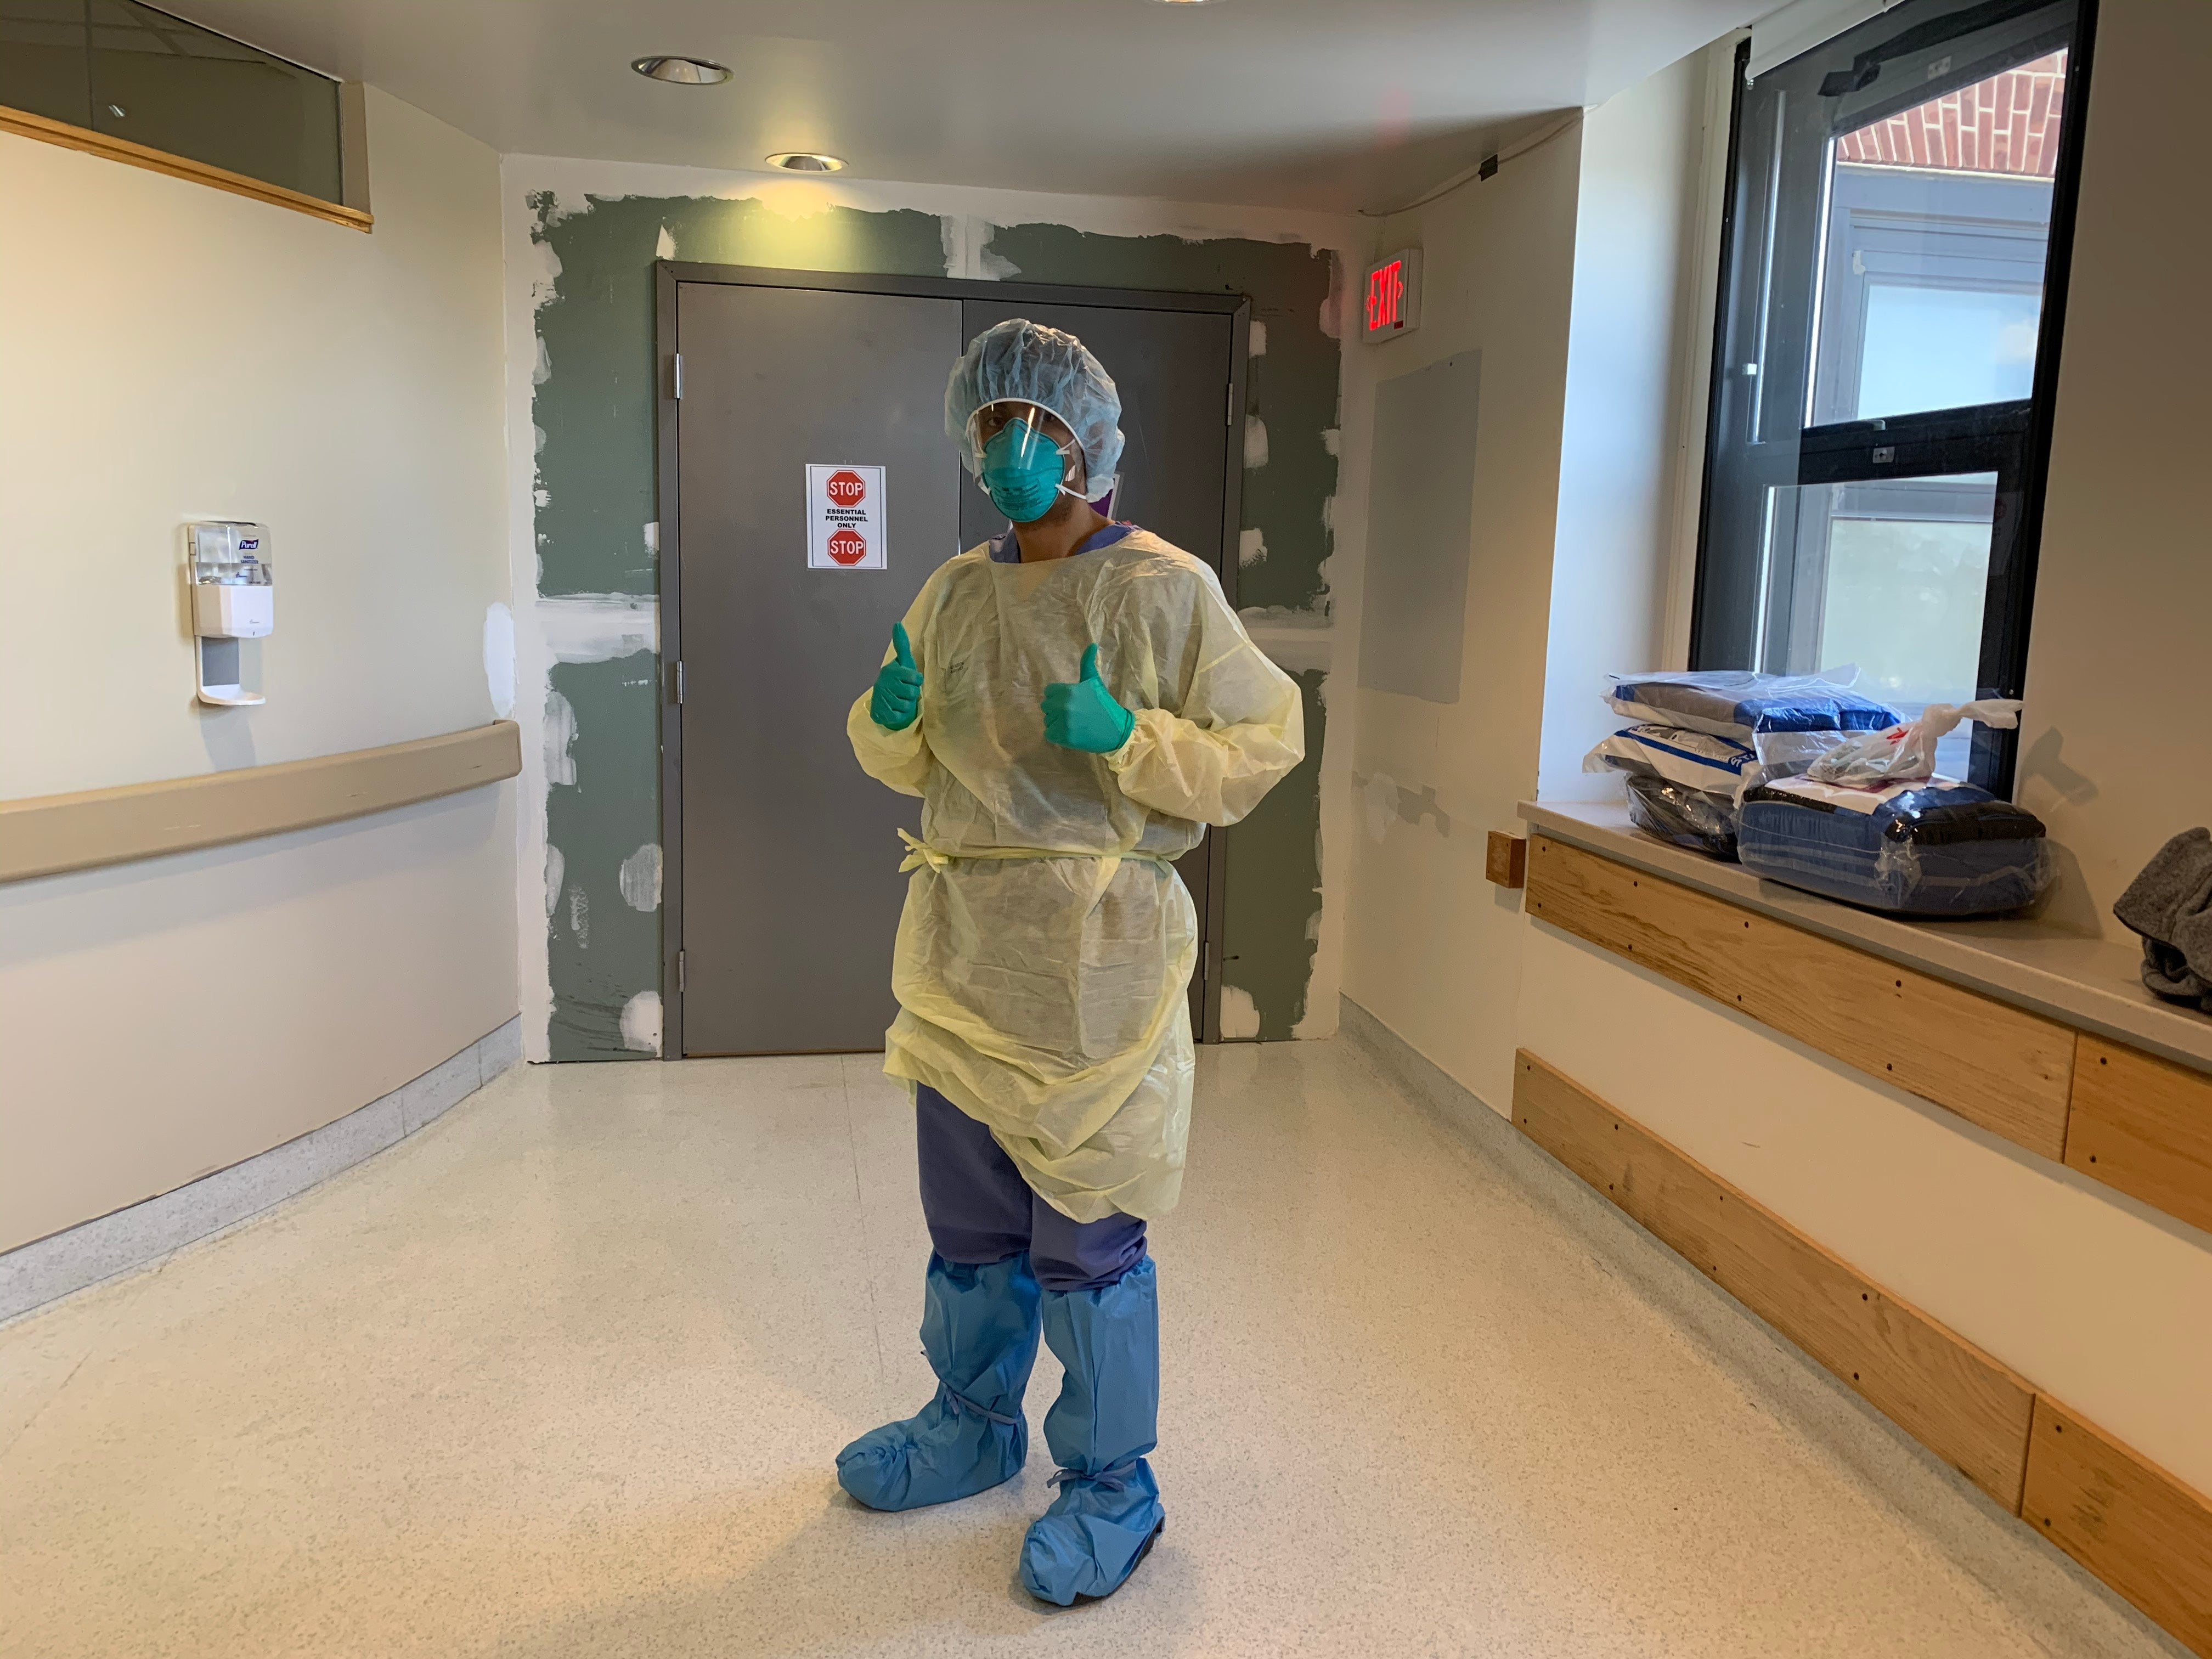 David Sanchez in his scrubs, gloves, and face mask in a hallway at Brigham and Women's hospital